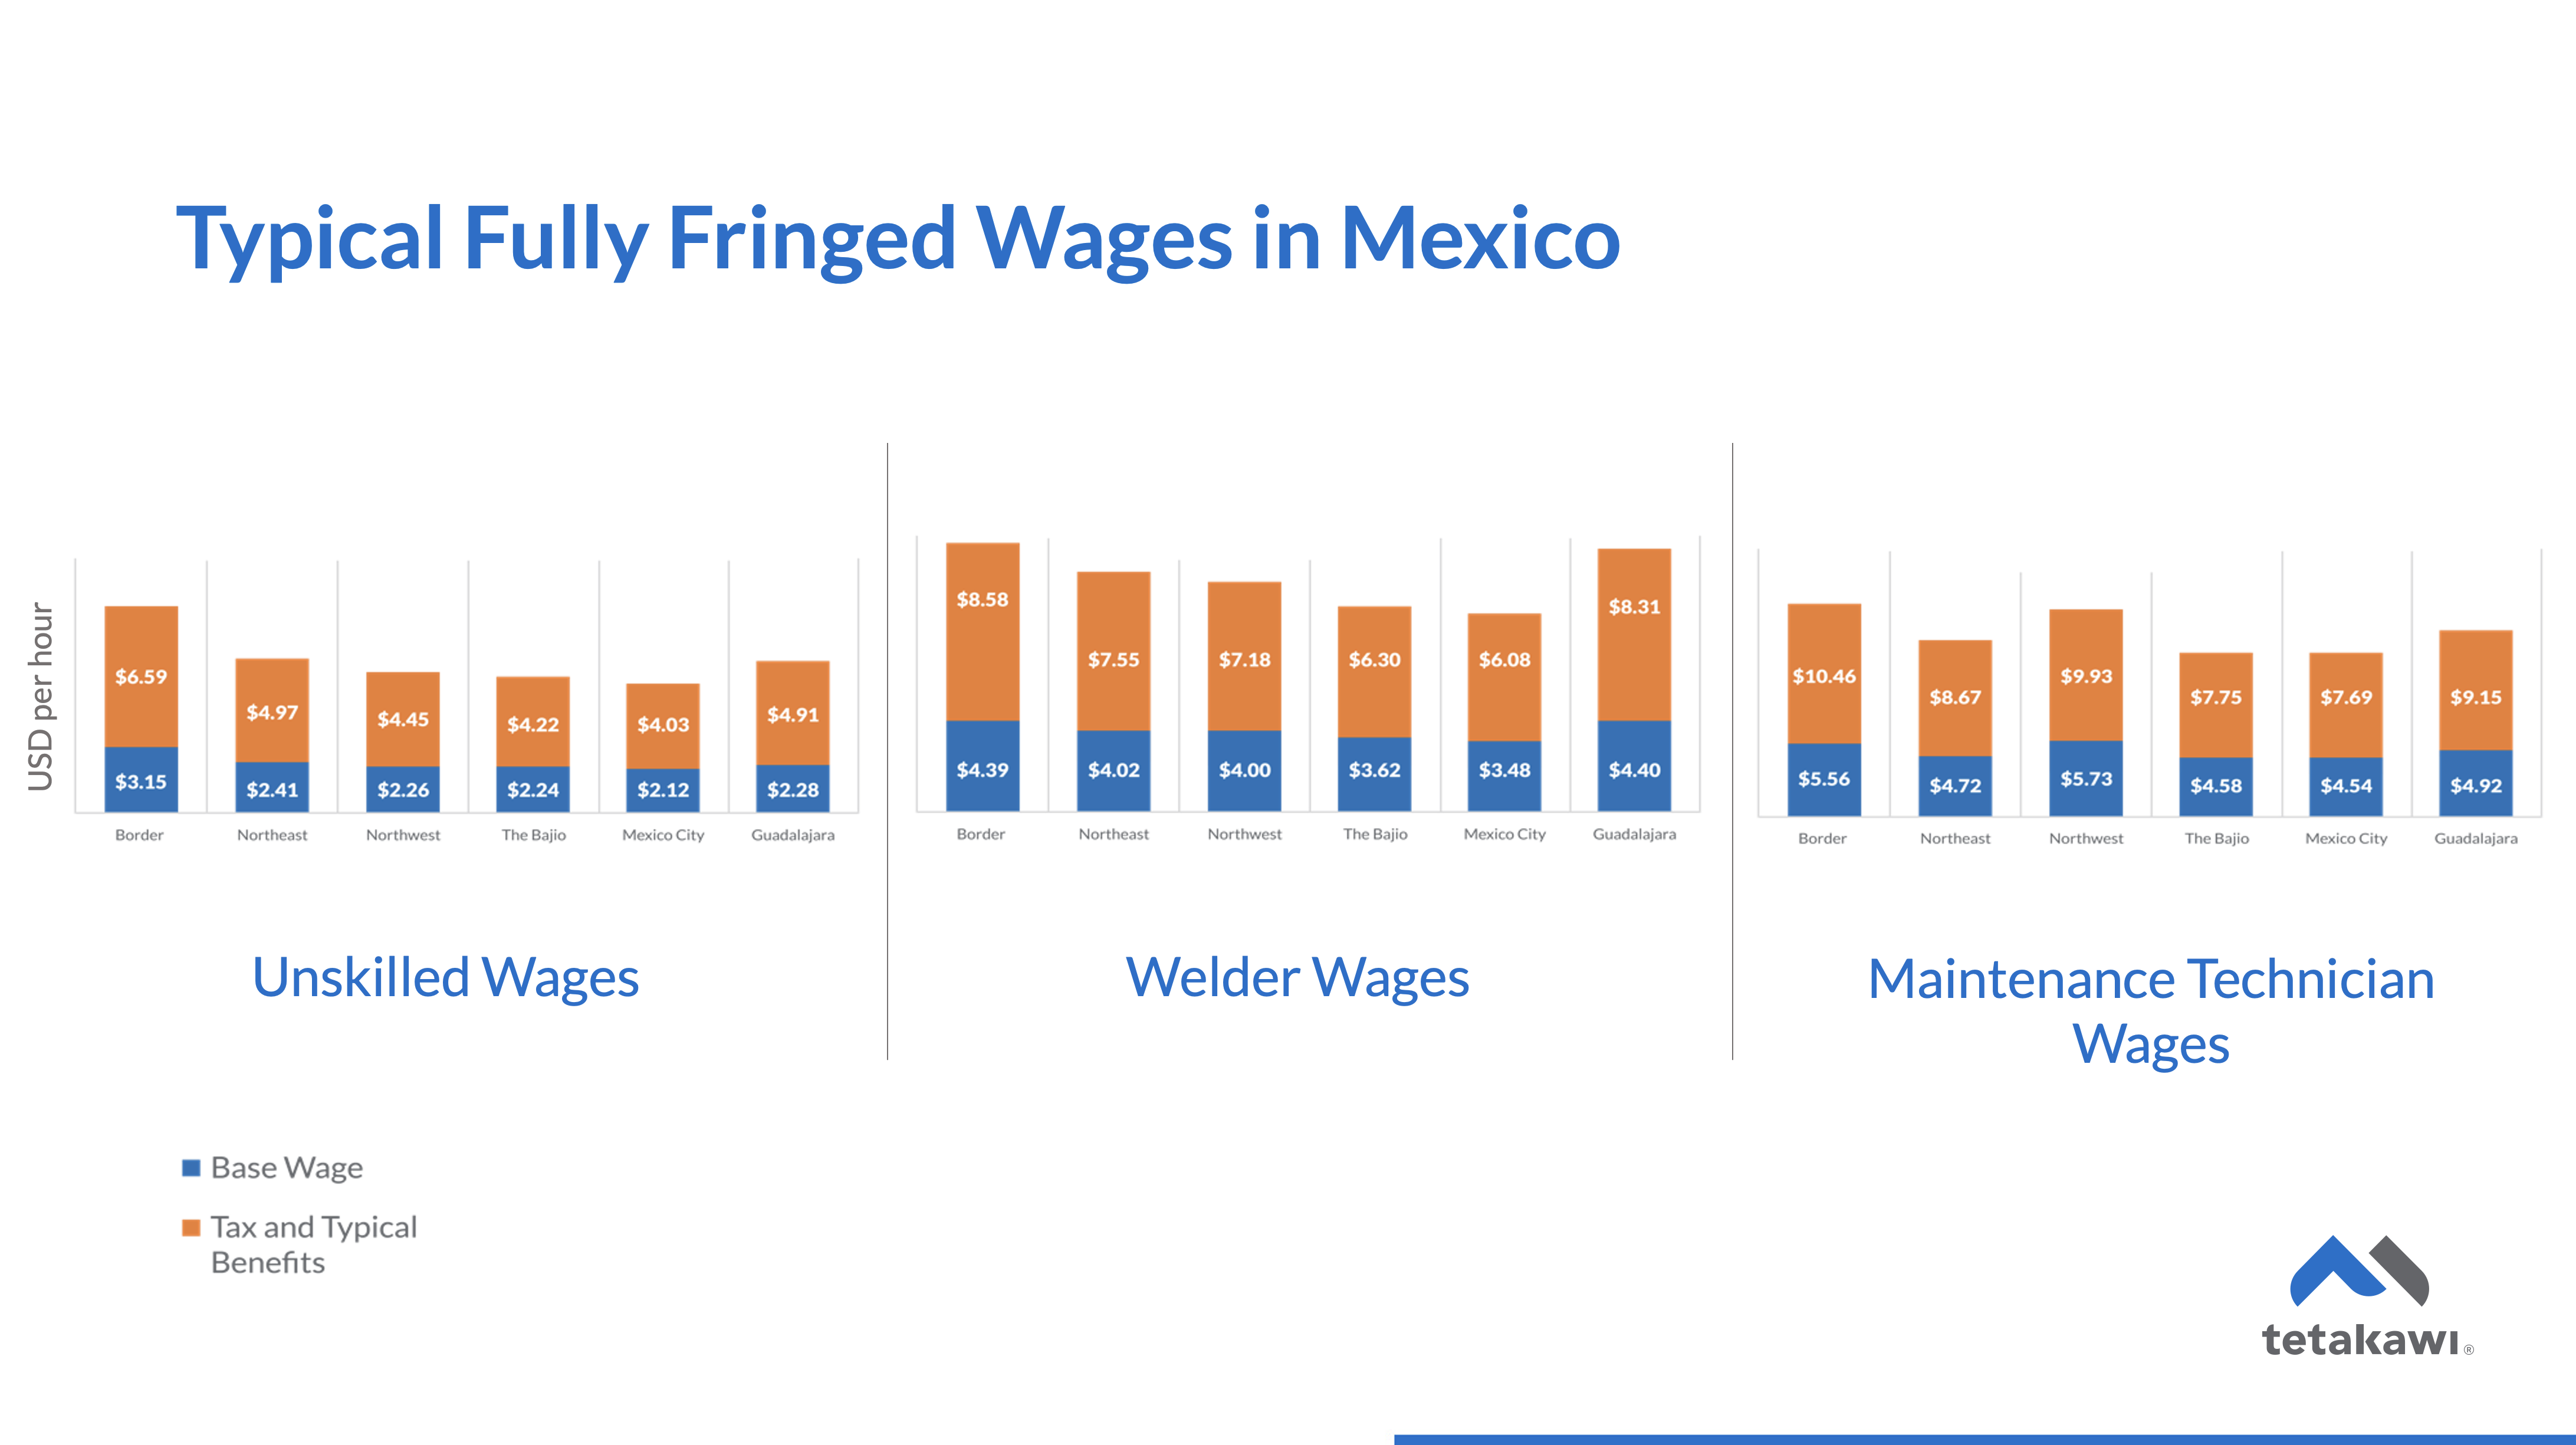 Typical fully fringed wages for manufacturing workers in Mexico